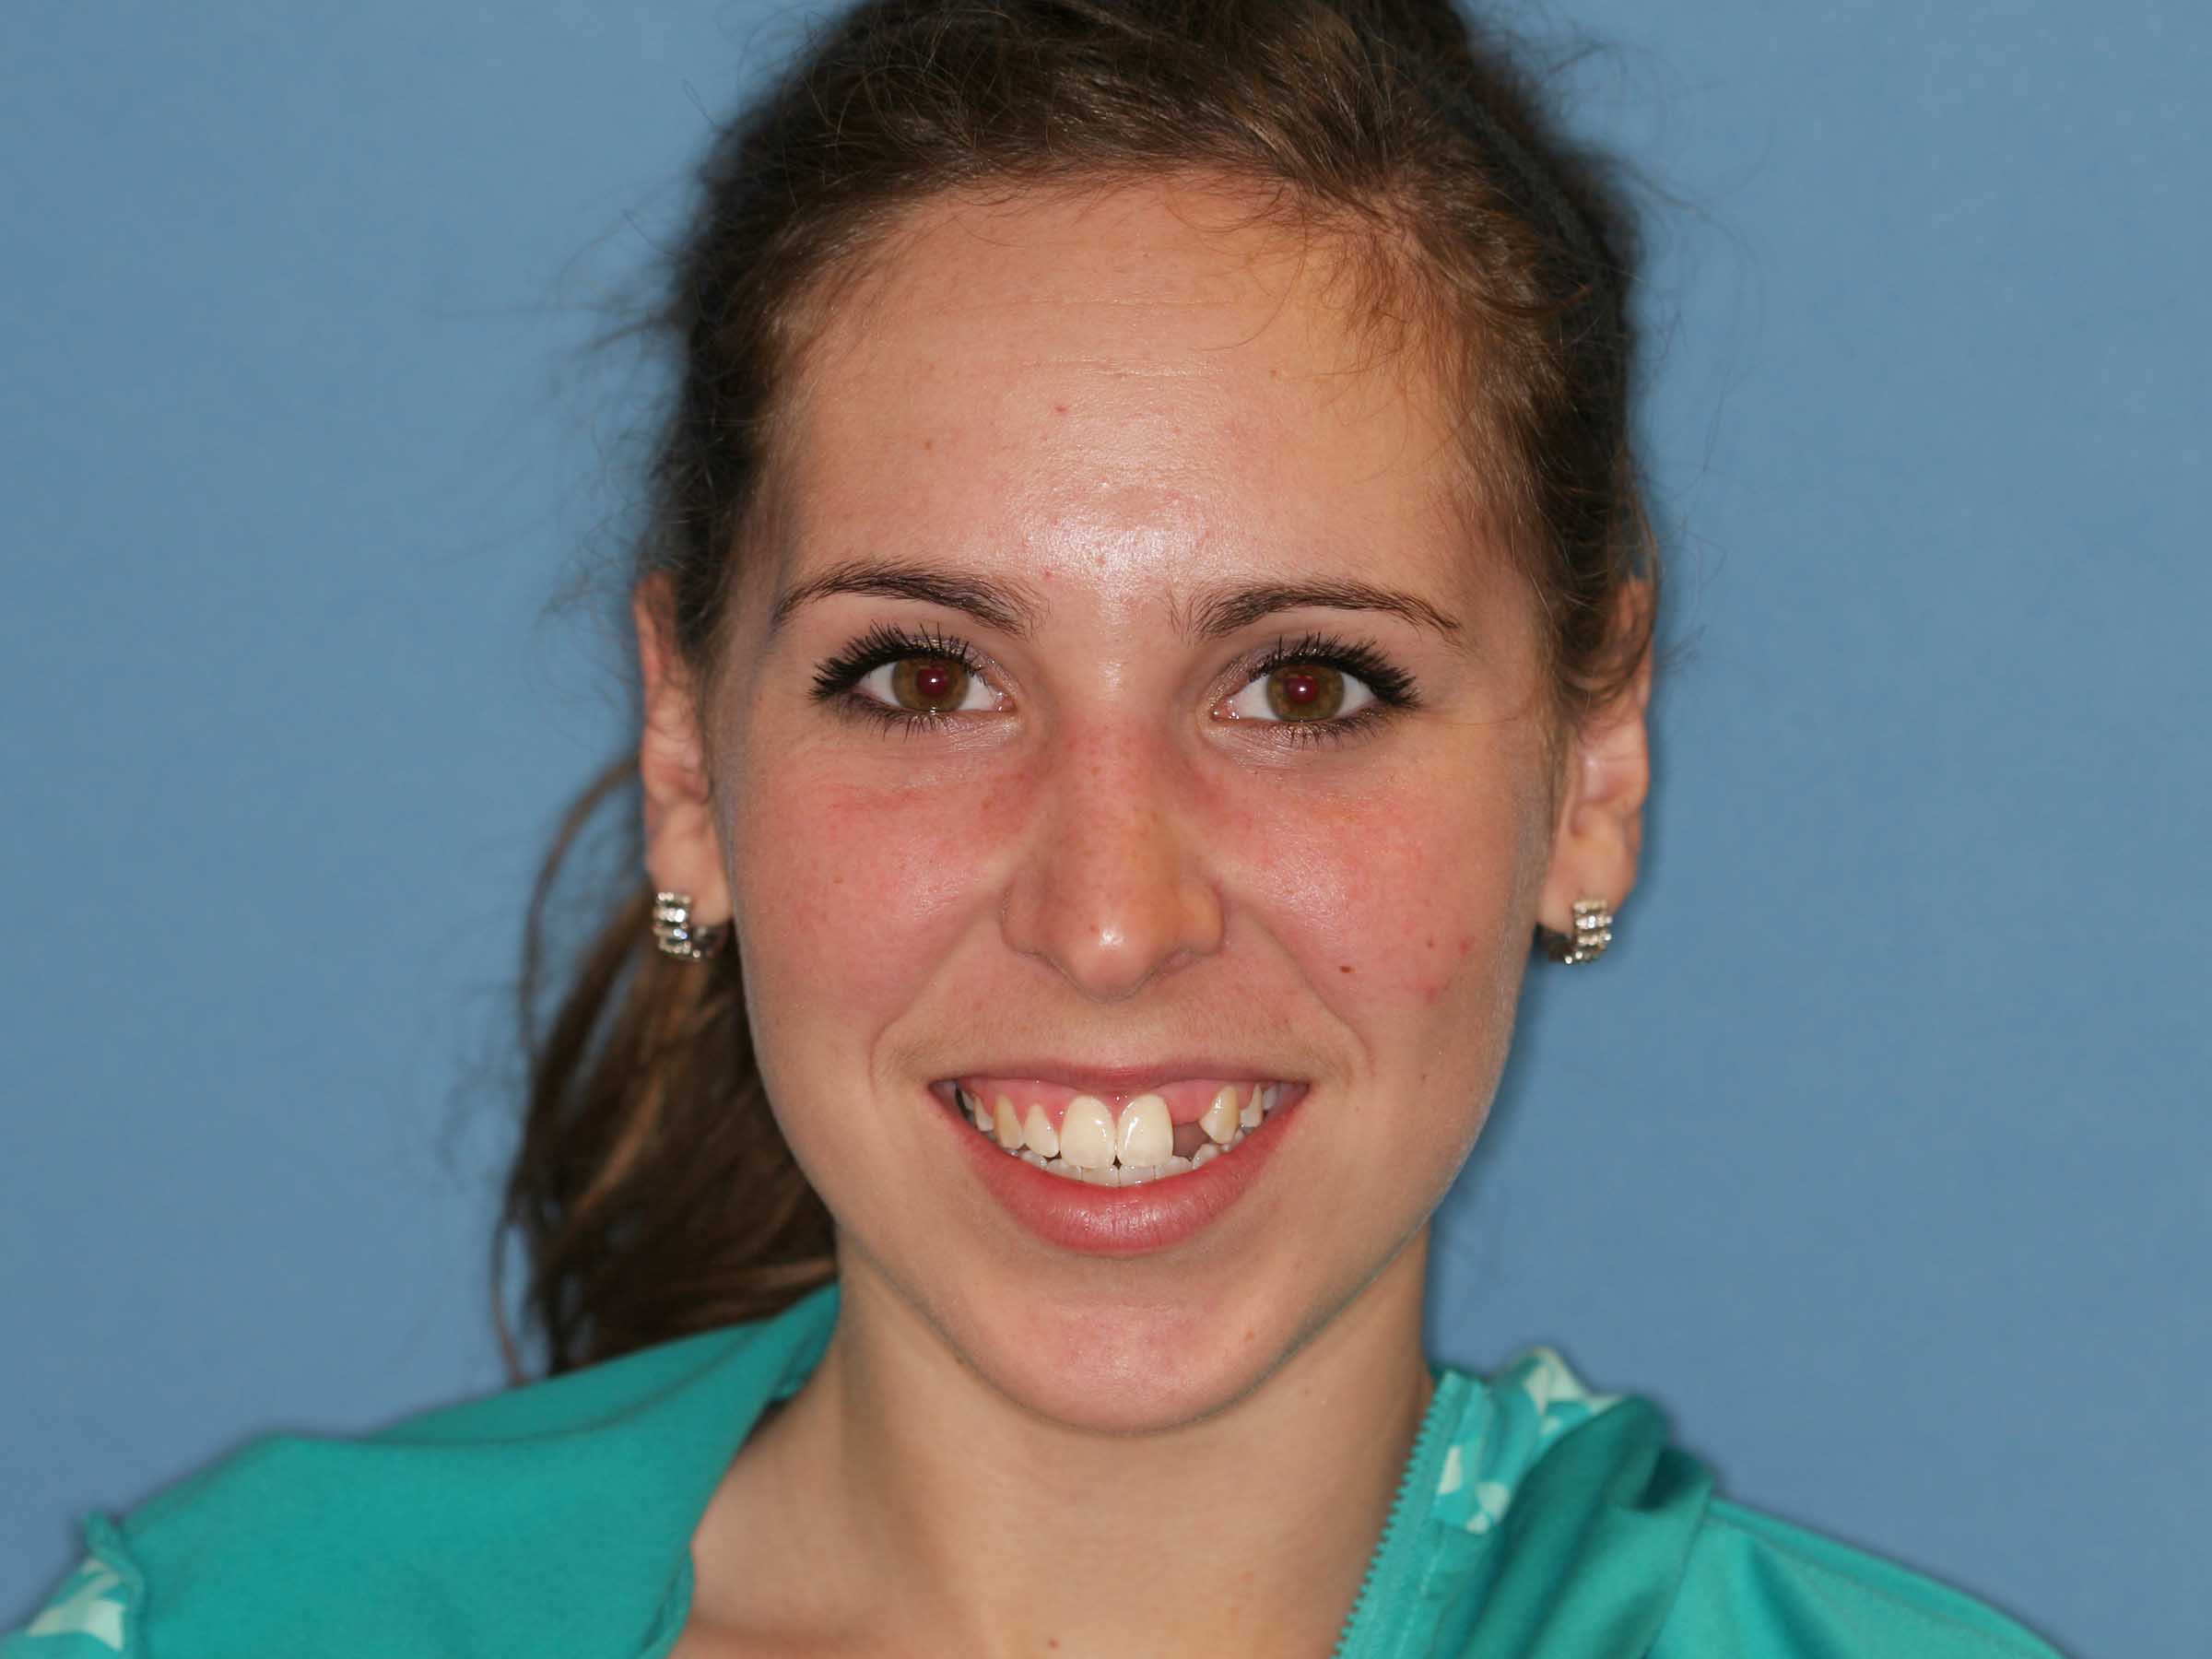 Diagnostics and a clear dental plan were established before her single-tooth implant